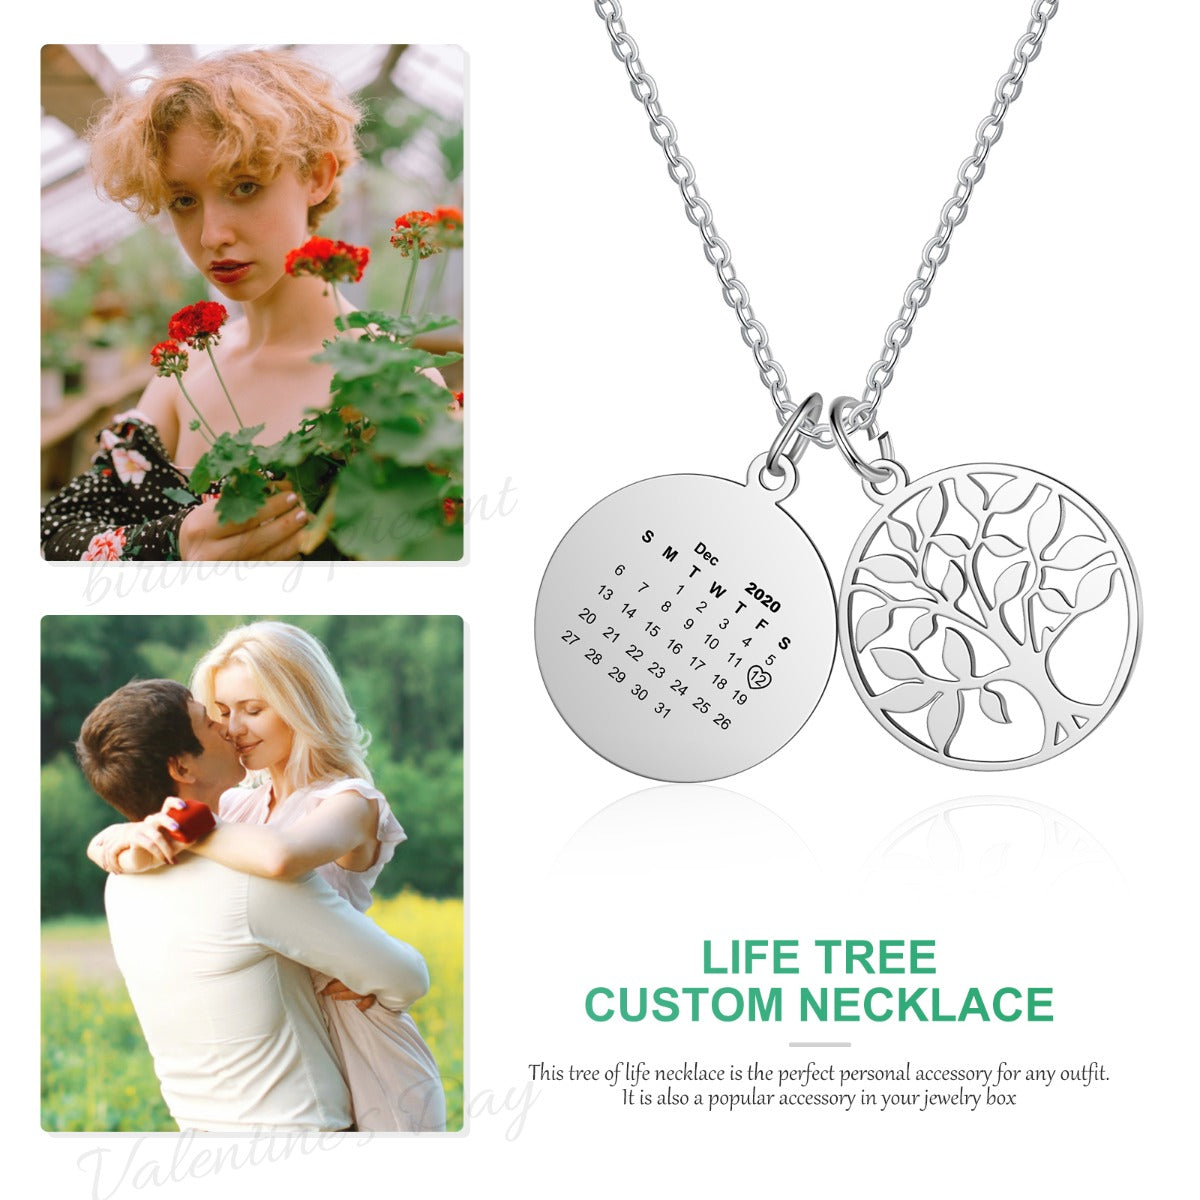 Personalized Stainless Steel Family Tree Necklace